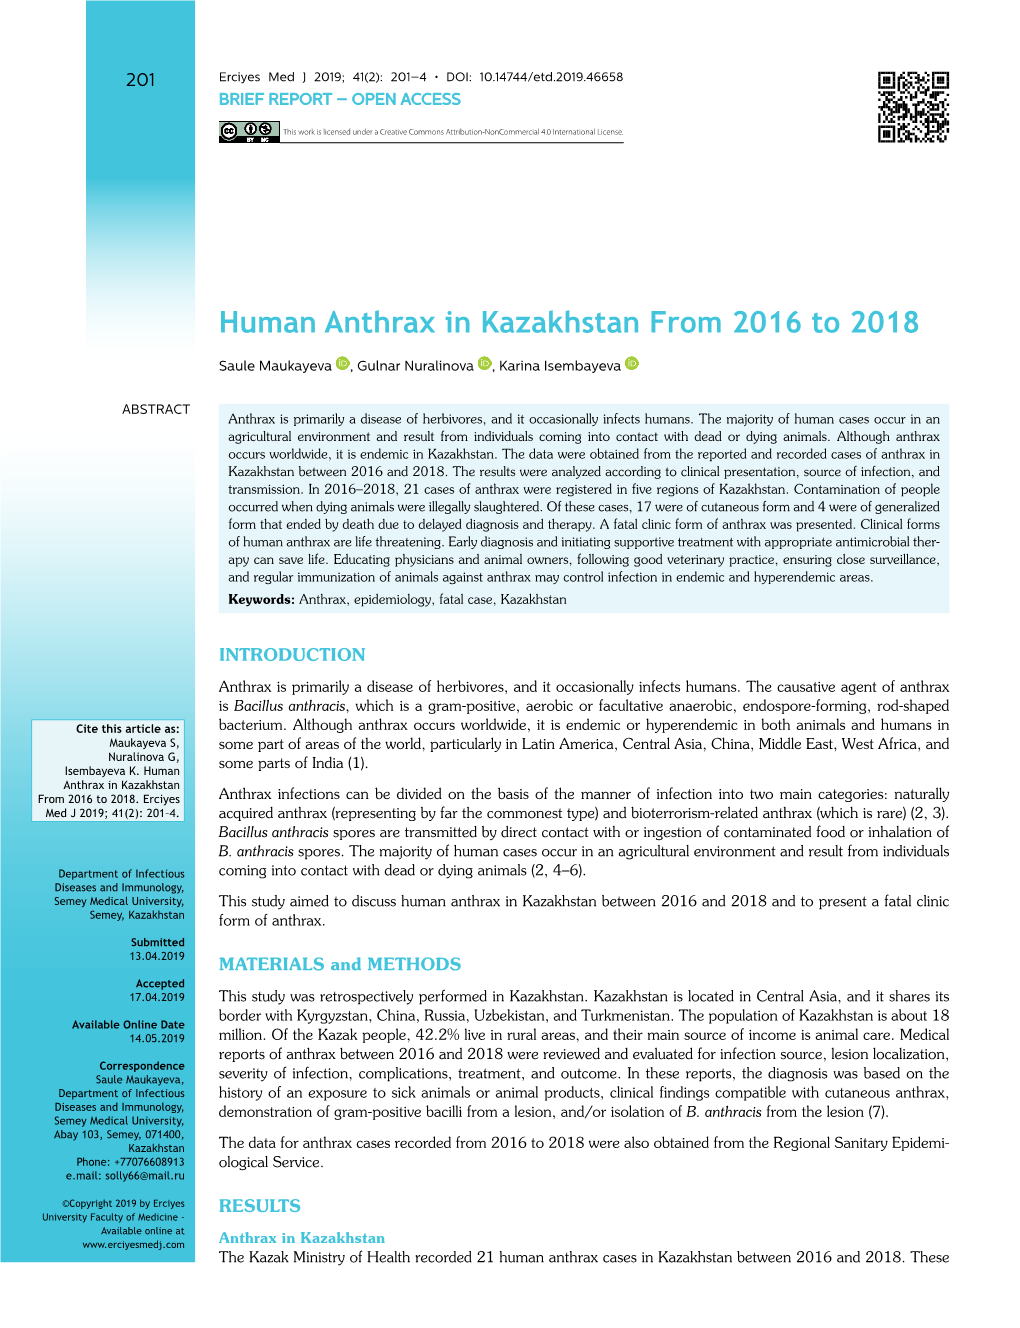 Human Anthrax in Kazakhstan from 2016 to 2018